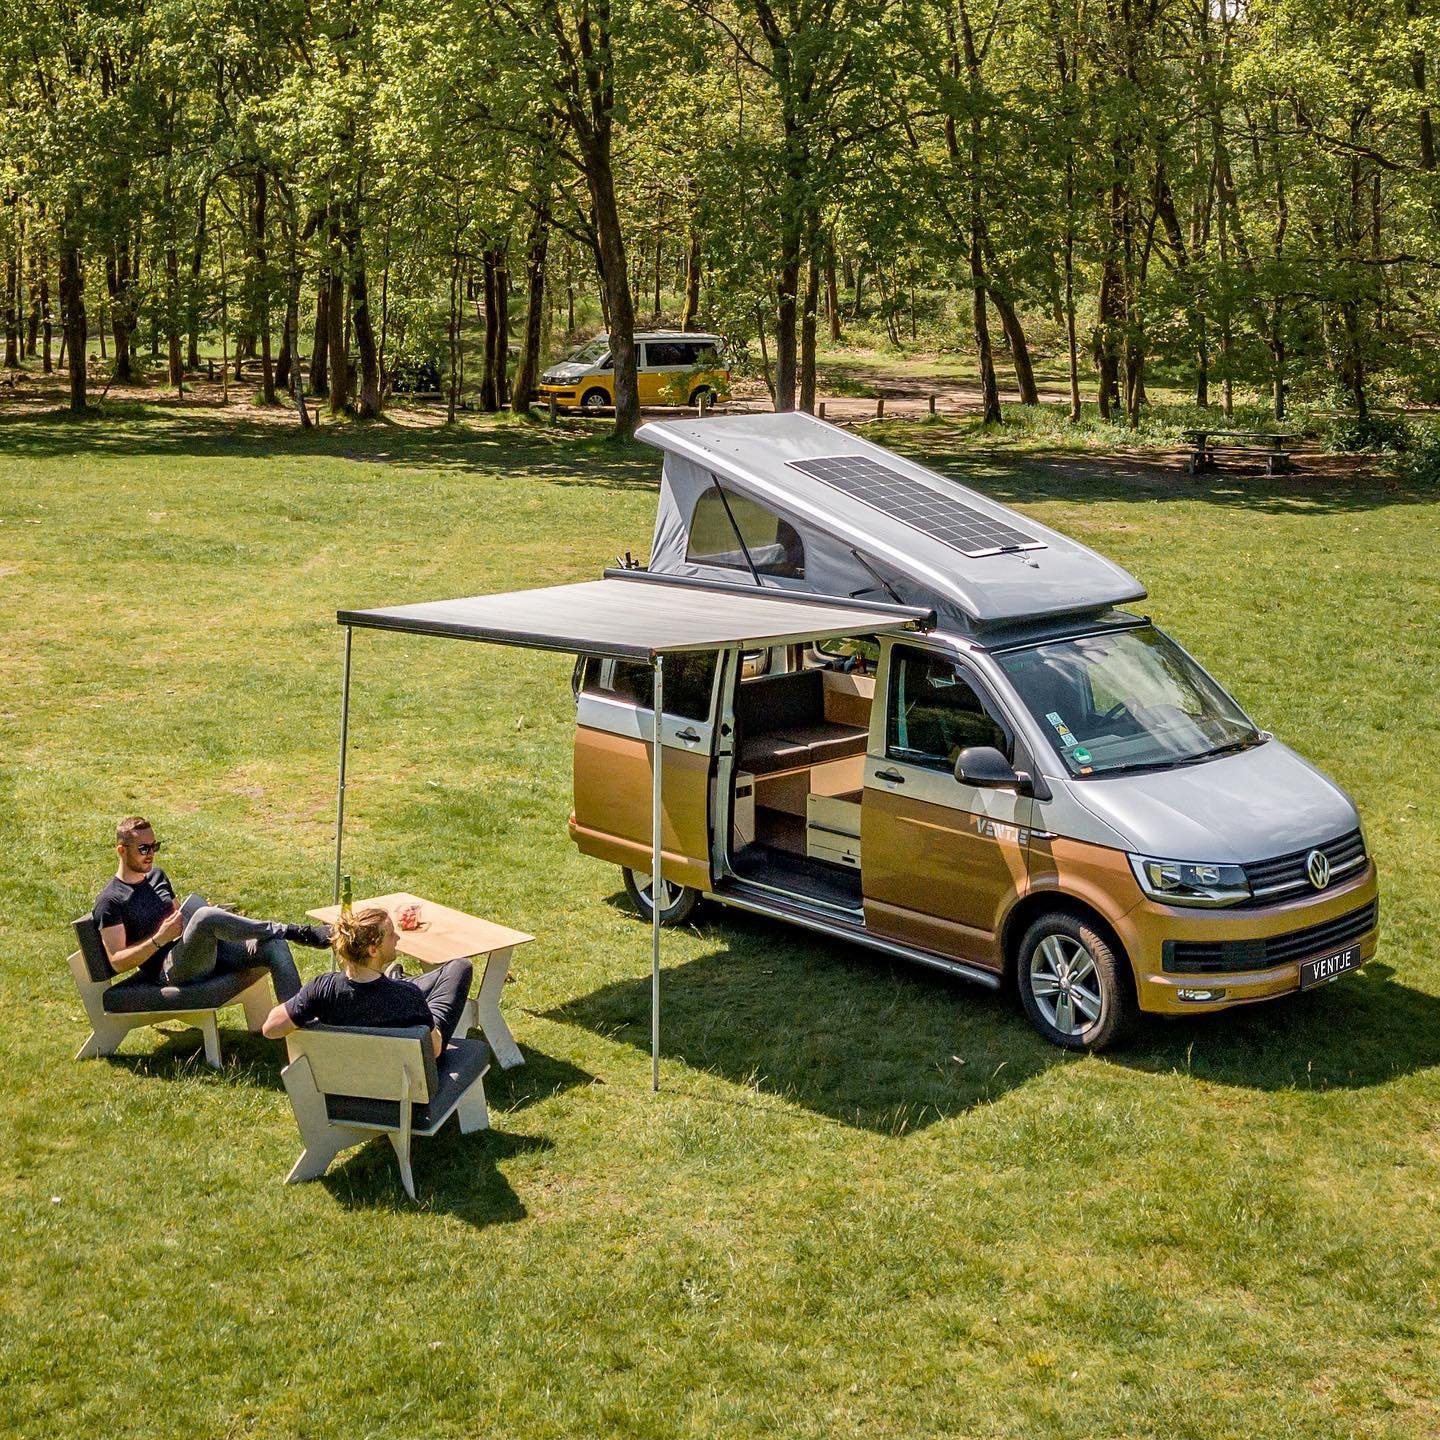 https://s1.cdn.autoevolution.com/images/news/ventje-campers-are-ikea-style-gadgets-on-wheels-built-for-the-new-hybrid-workforce-187891_1.jpg